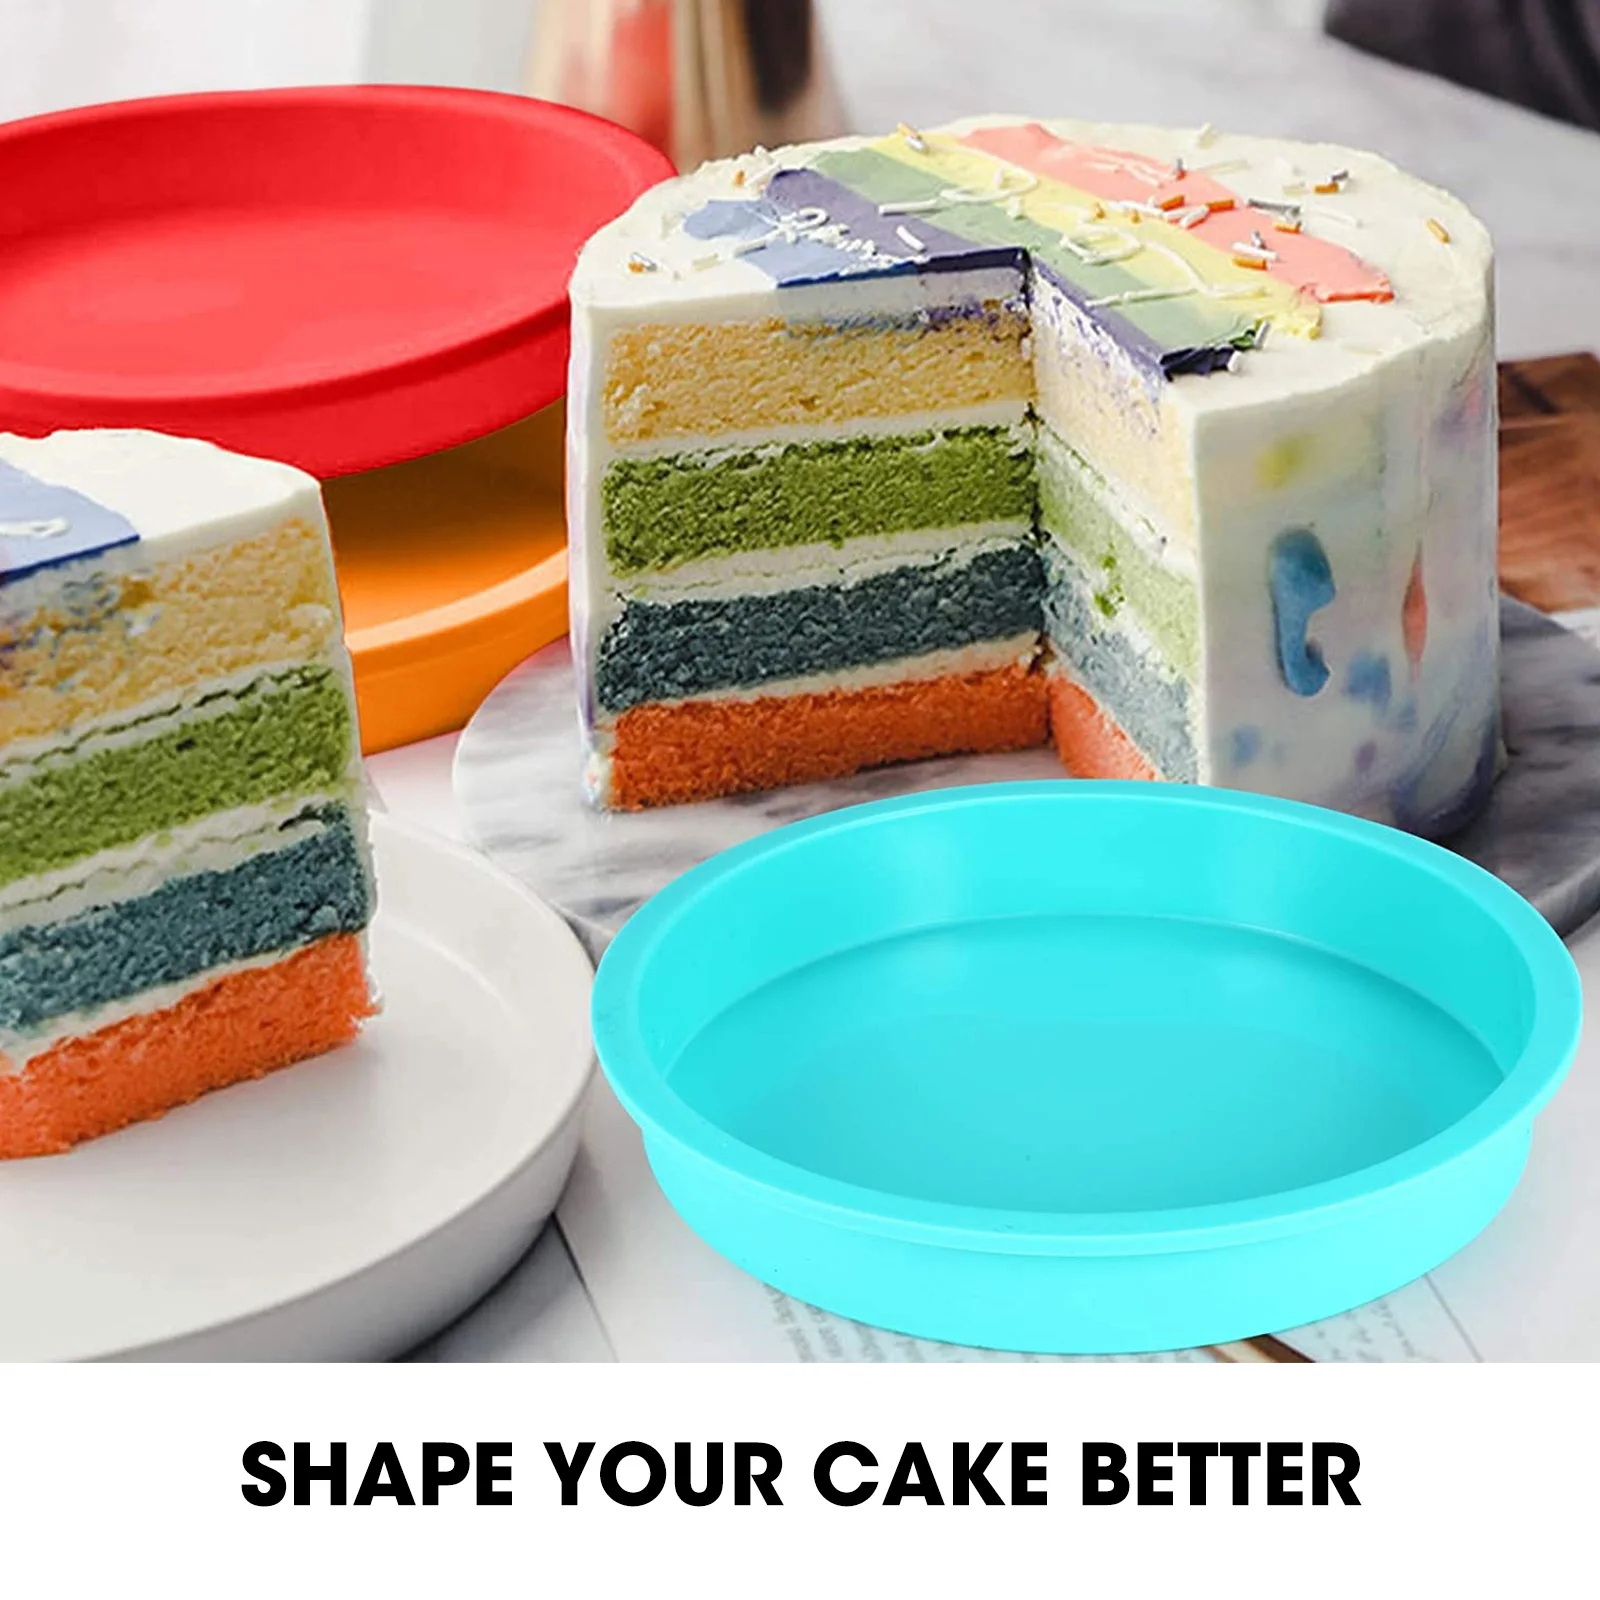 Nonstick & Quick Release Silicone Cake Mould for Layer Cake Cheesecake 4+6+8+10 Silicone Cake Tins for Baking Rainbow Cake and Chiffon Cake 4 Pcs Round Baking Tins 